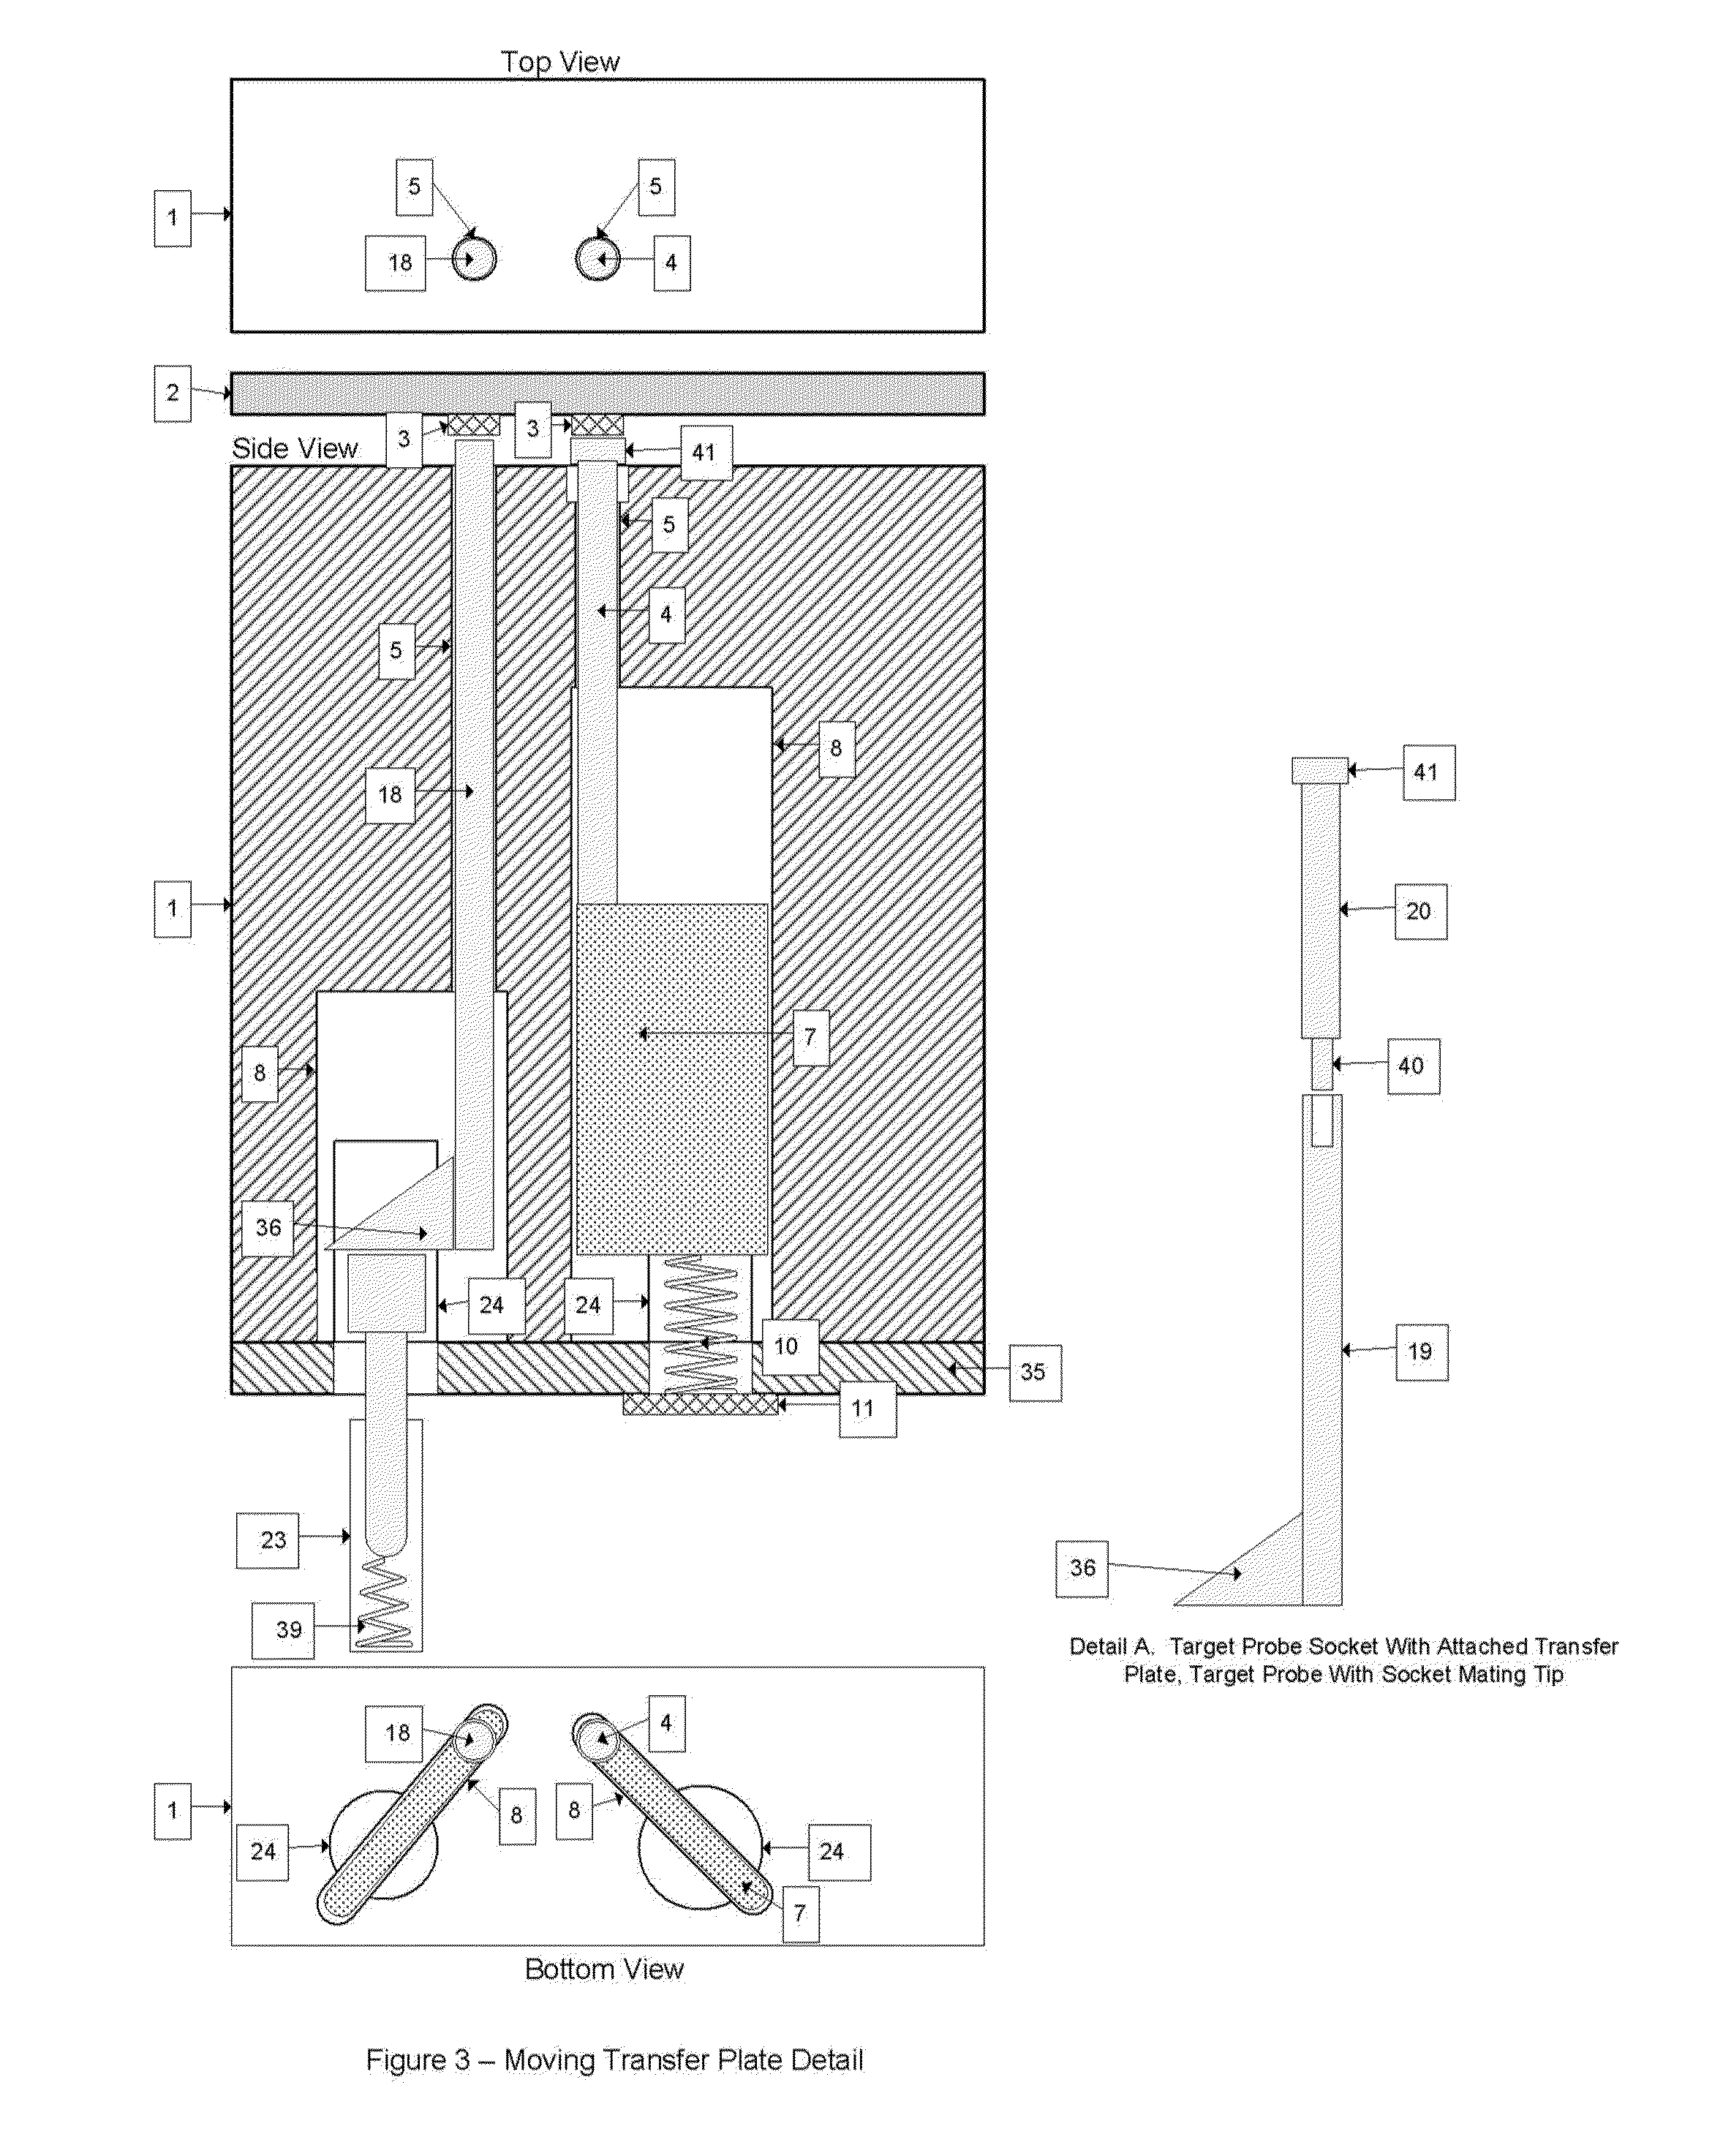 High accuracy electrical test interconnection device and method for electrical circuit board testing